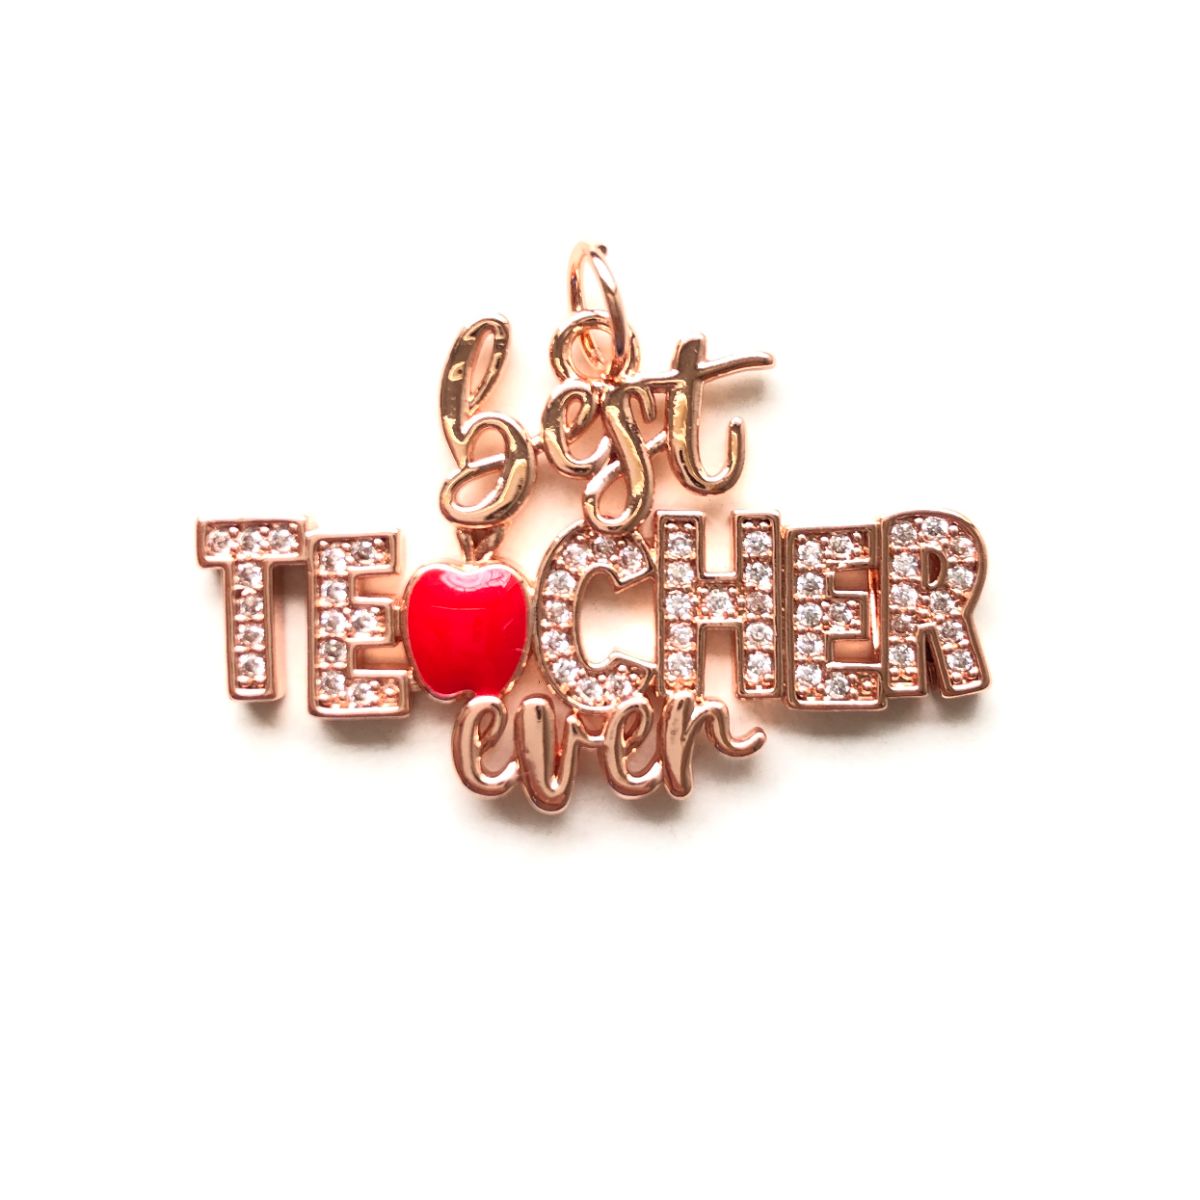 10pcs/lot 33.6*19.5mm CZ Paved Best Teacher Ever Word Charms for Graduation Teacher's Day Rose Gold CZ Paved Charms Graduation New Charms Arrivals Words & Quotes Charms Beads Beyond